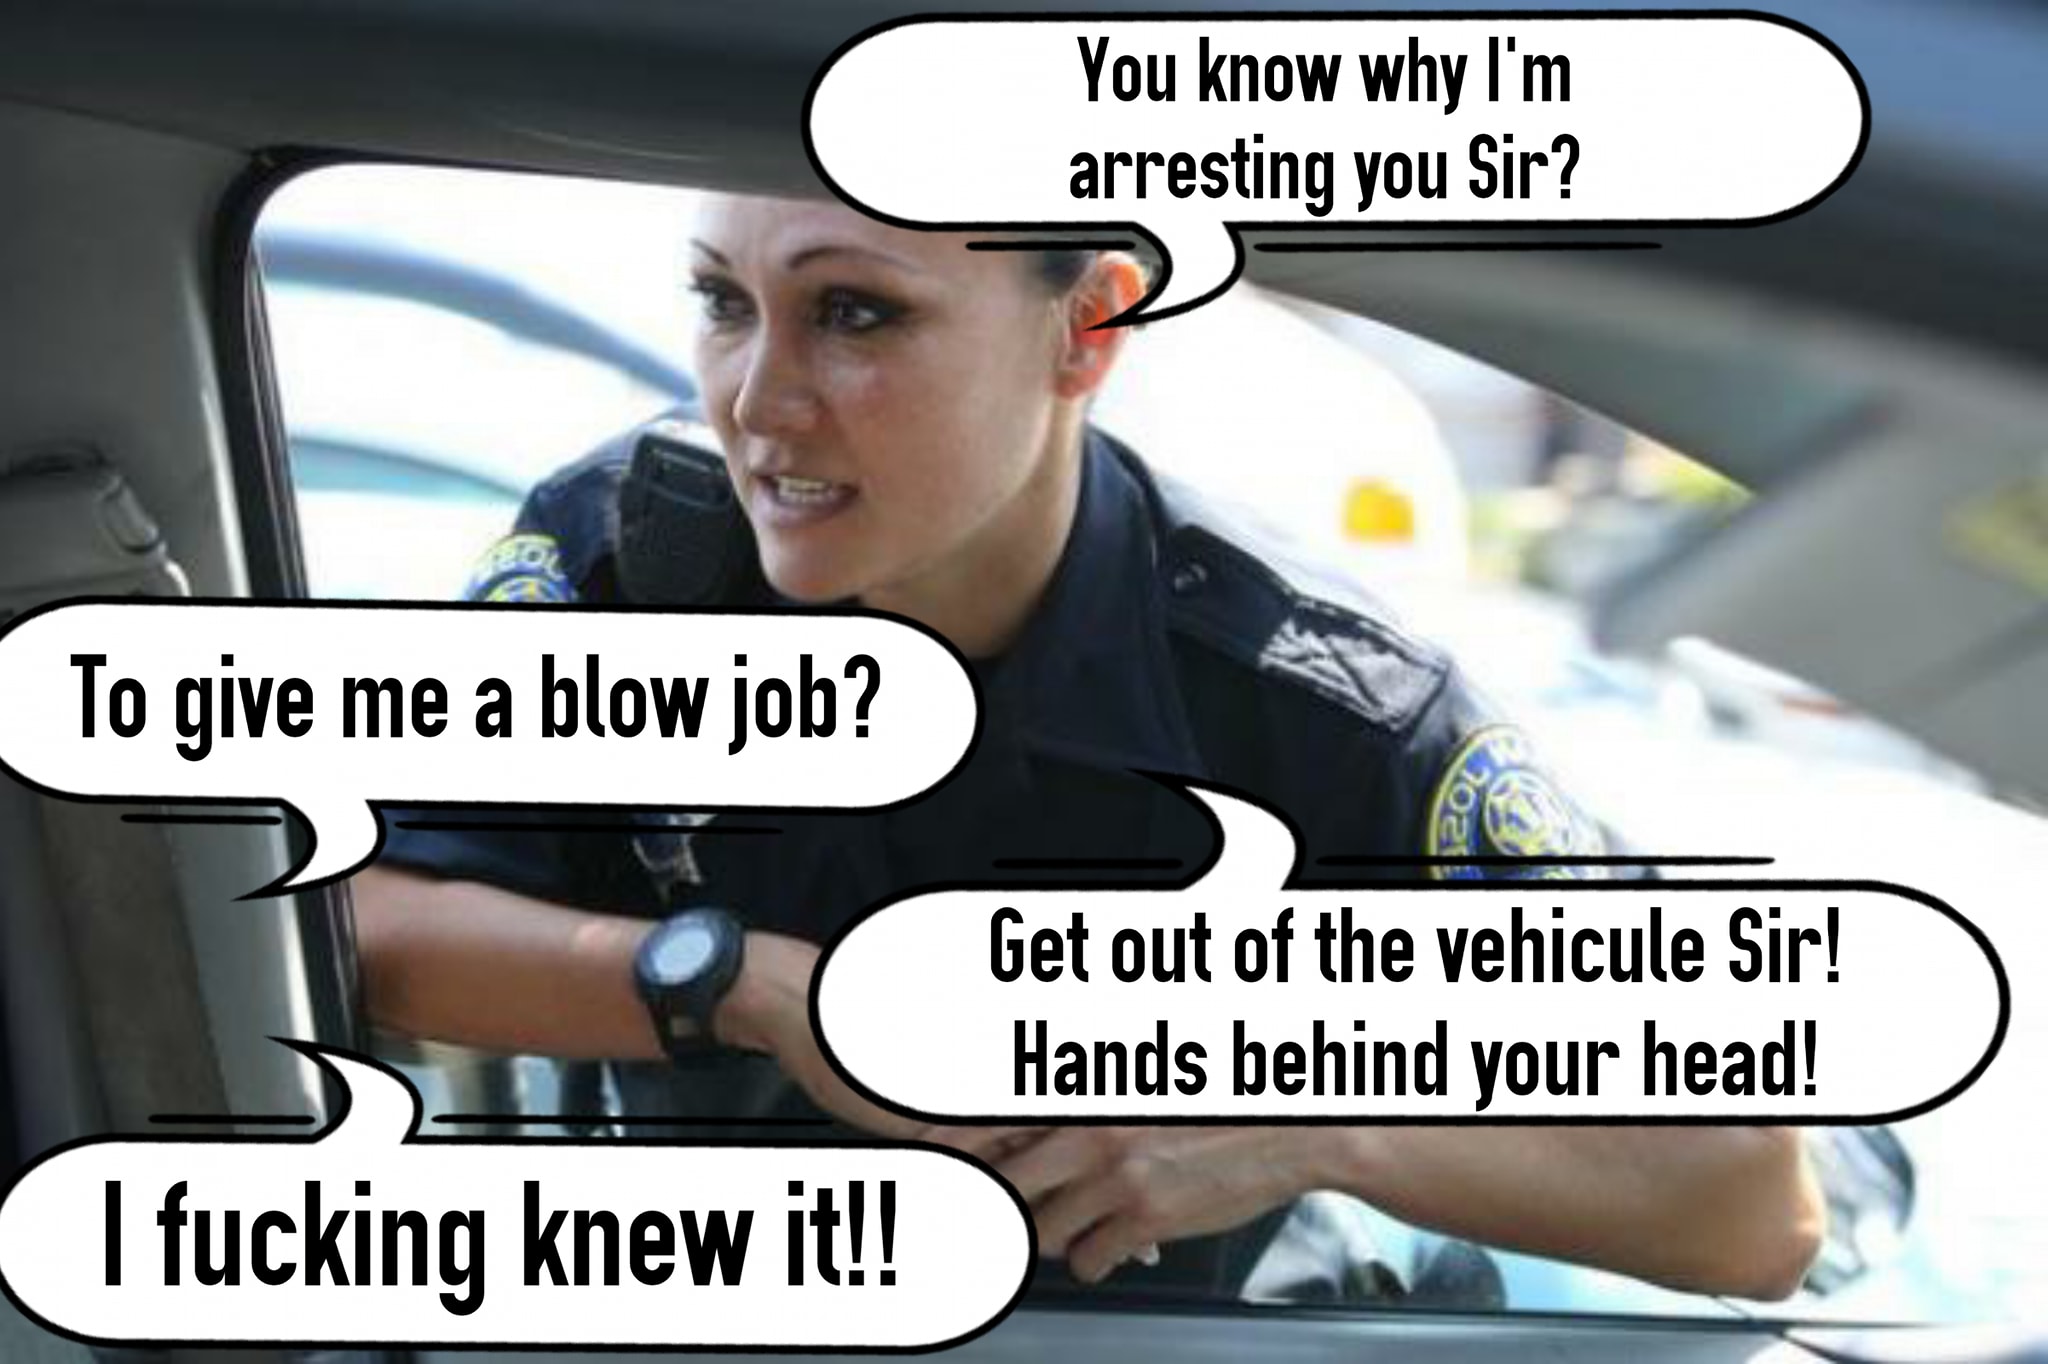 schild - You know why I'm arresting you Sir? To give me a blow job? Get out of the vehicule Sir! Hands behind your head! I fucking knew it!!